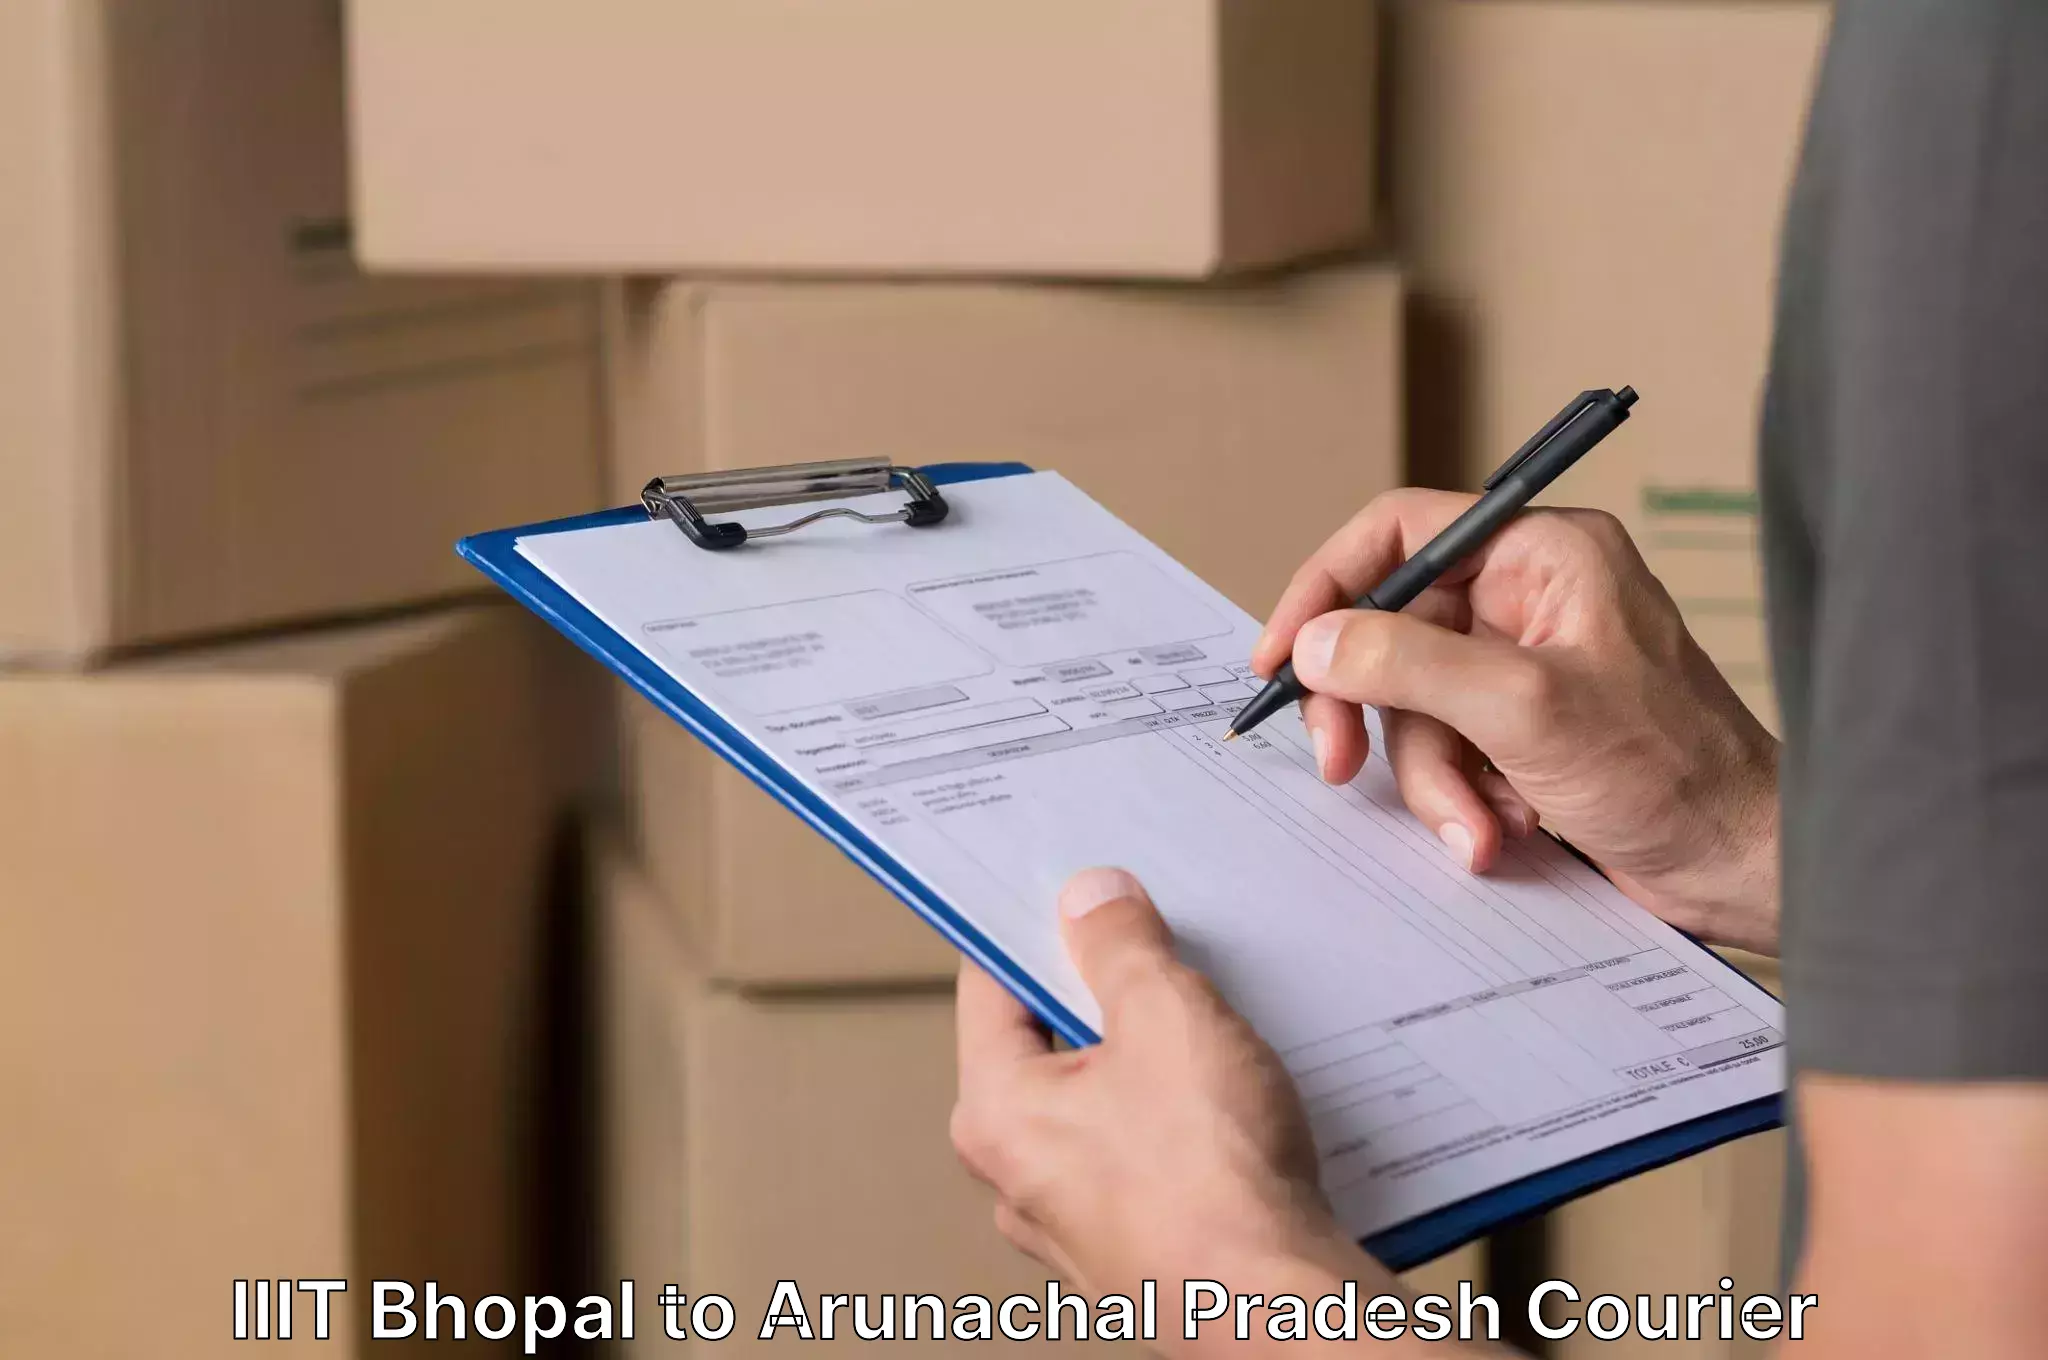 Furniture relocation experts IIIT Bhopal to Khonsa